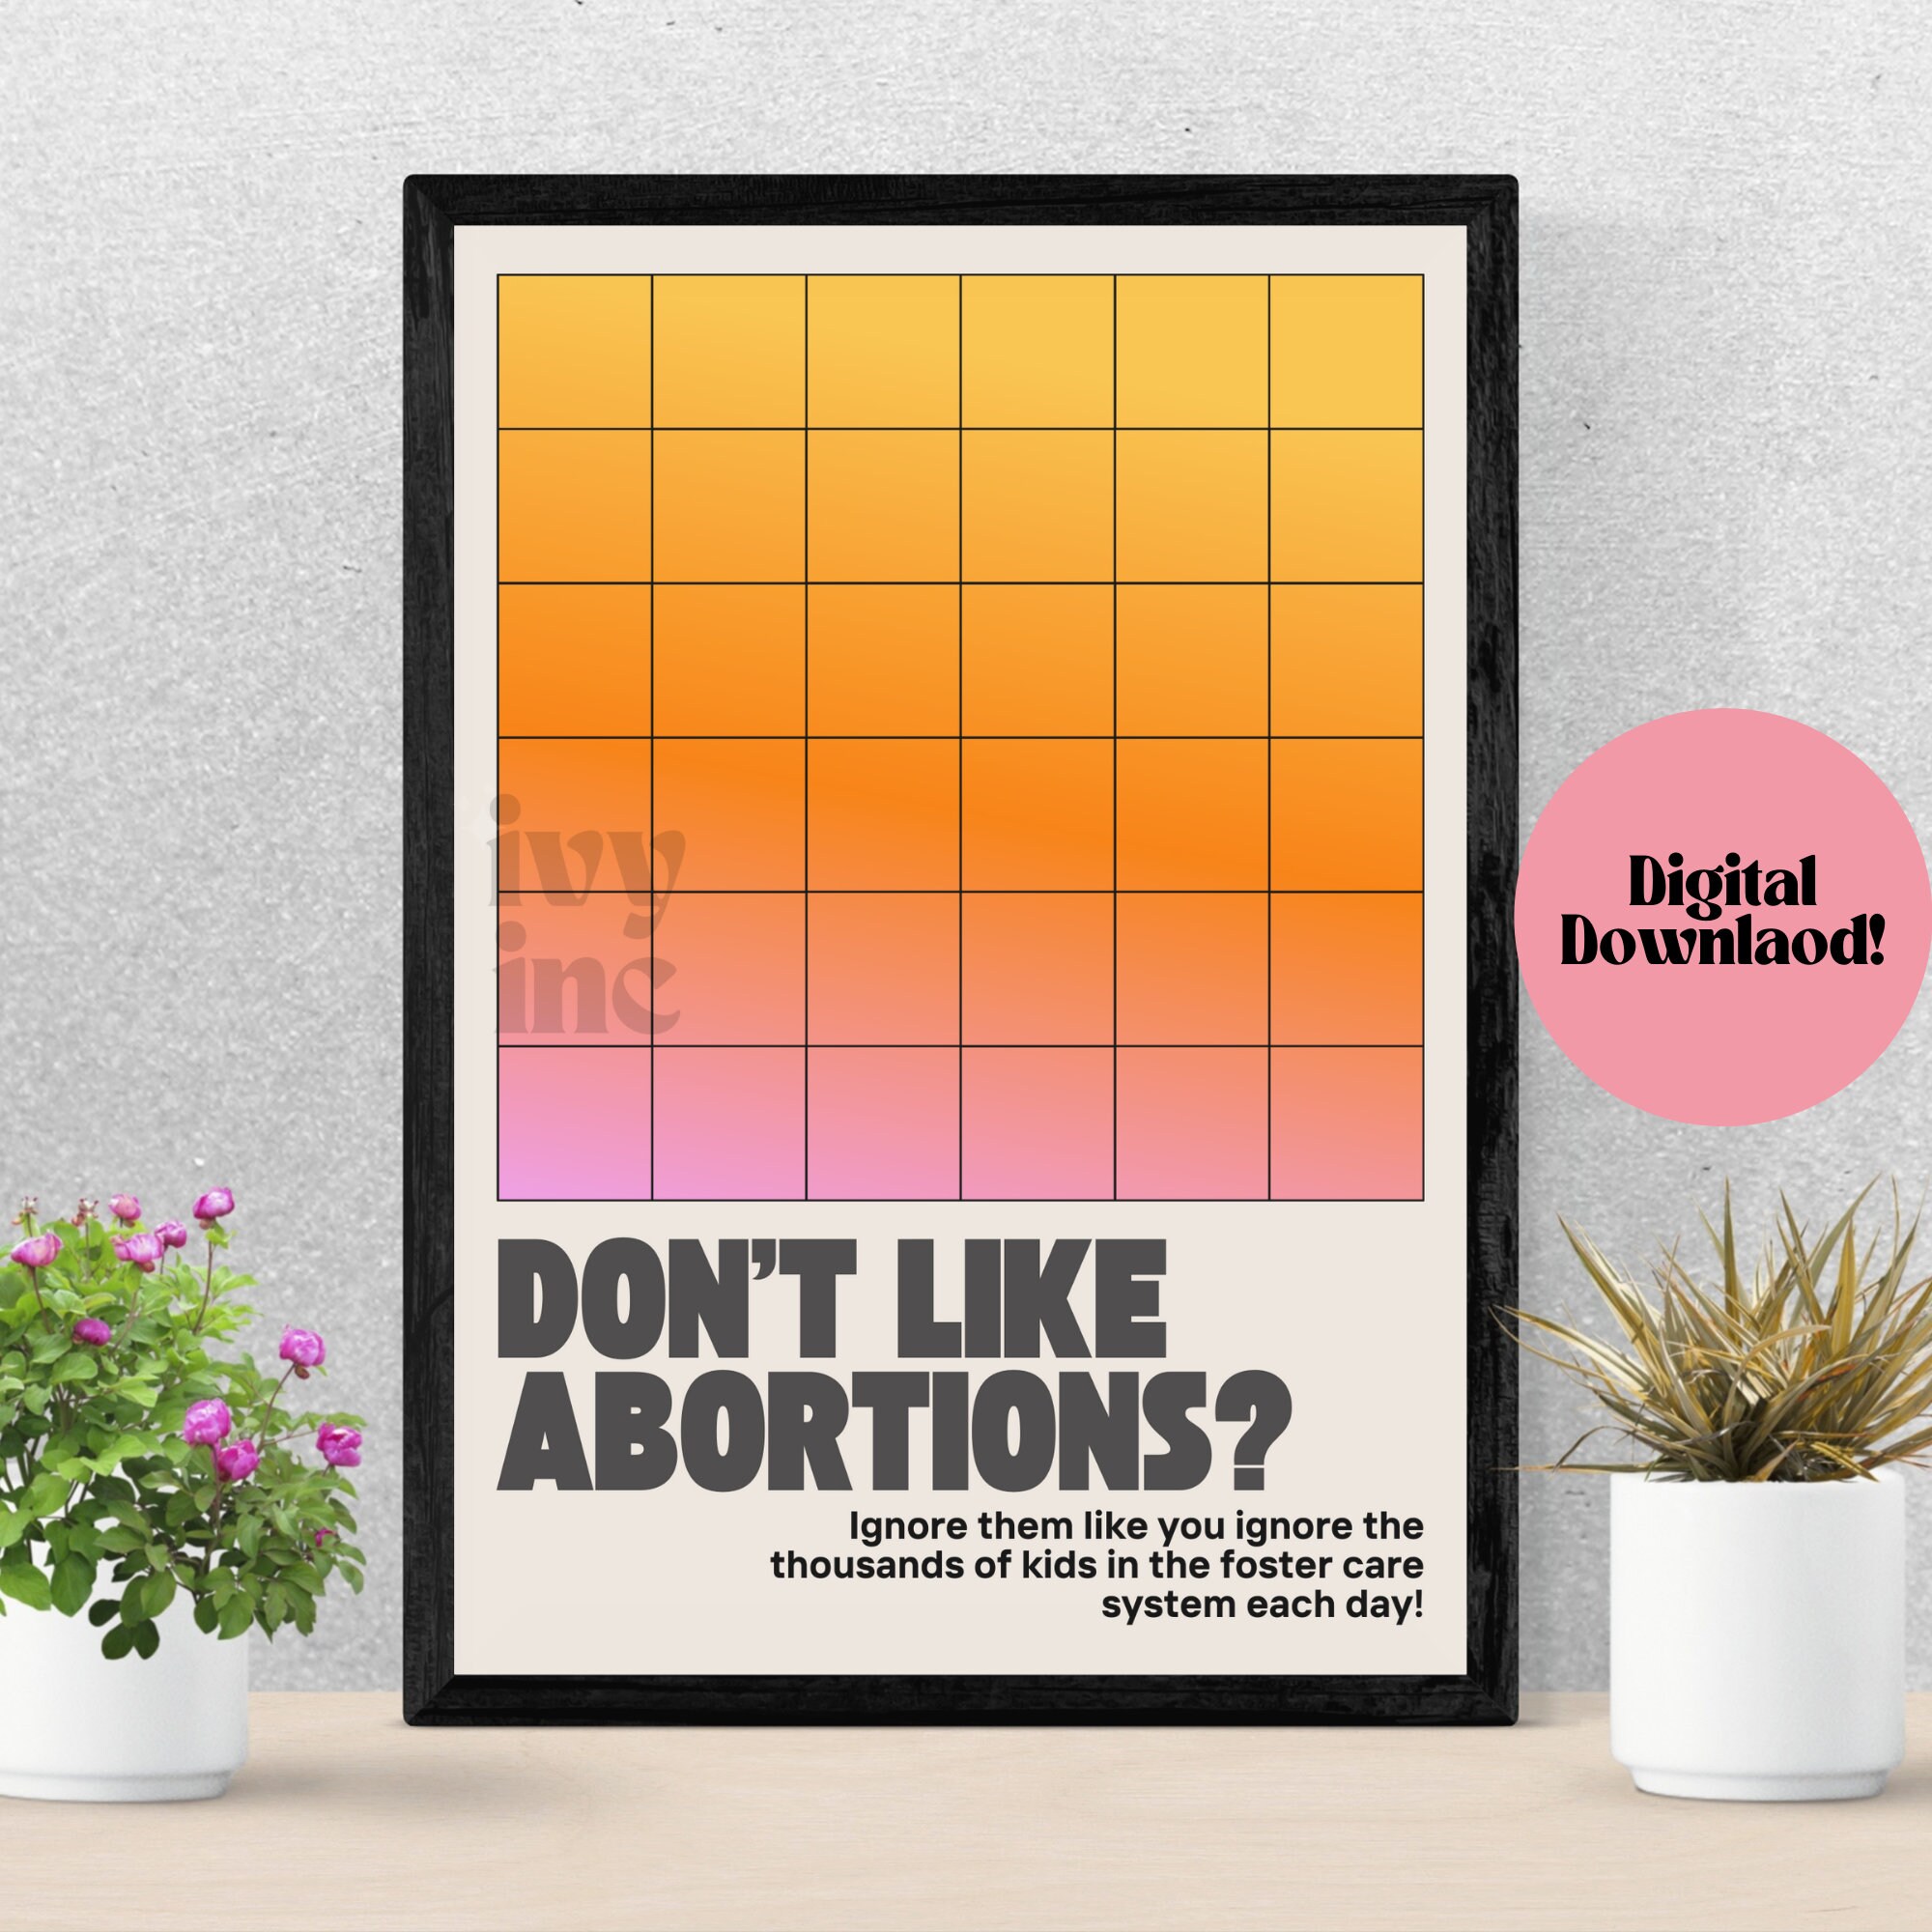 Abortion Rights Poster (Feminist Digital Download, Roe v Wade, Social Justice Print, Reproductive Rights, Pro Choice Art, Protest Sign)